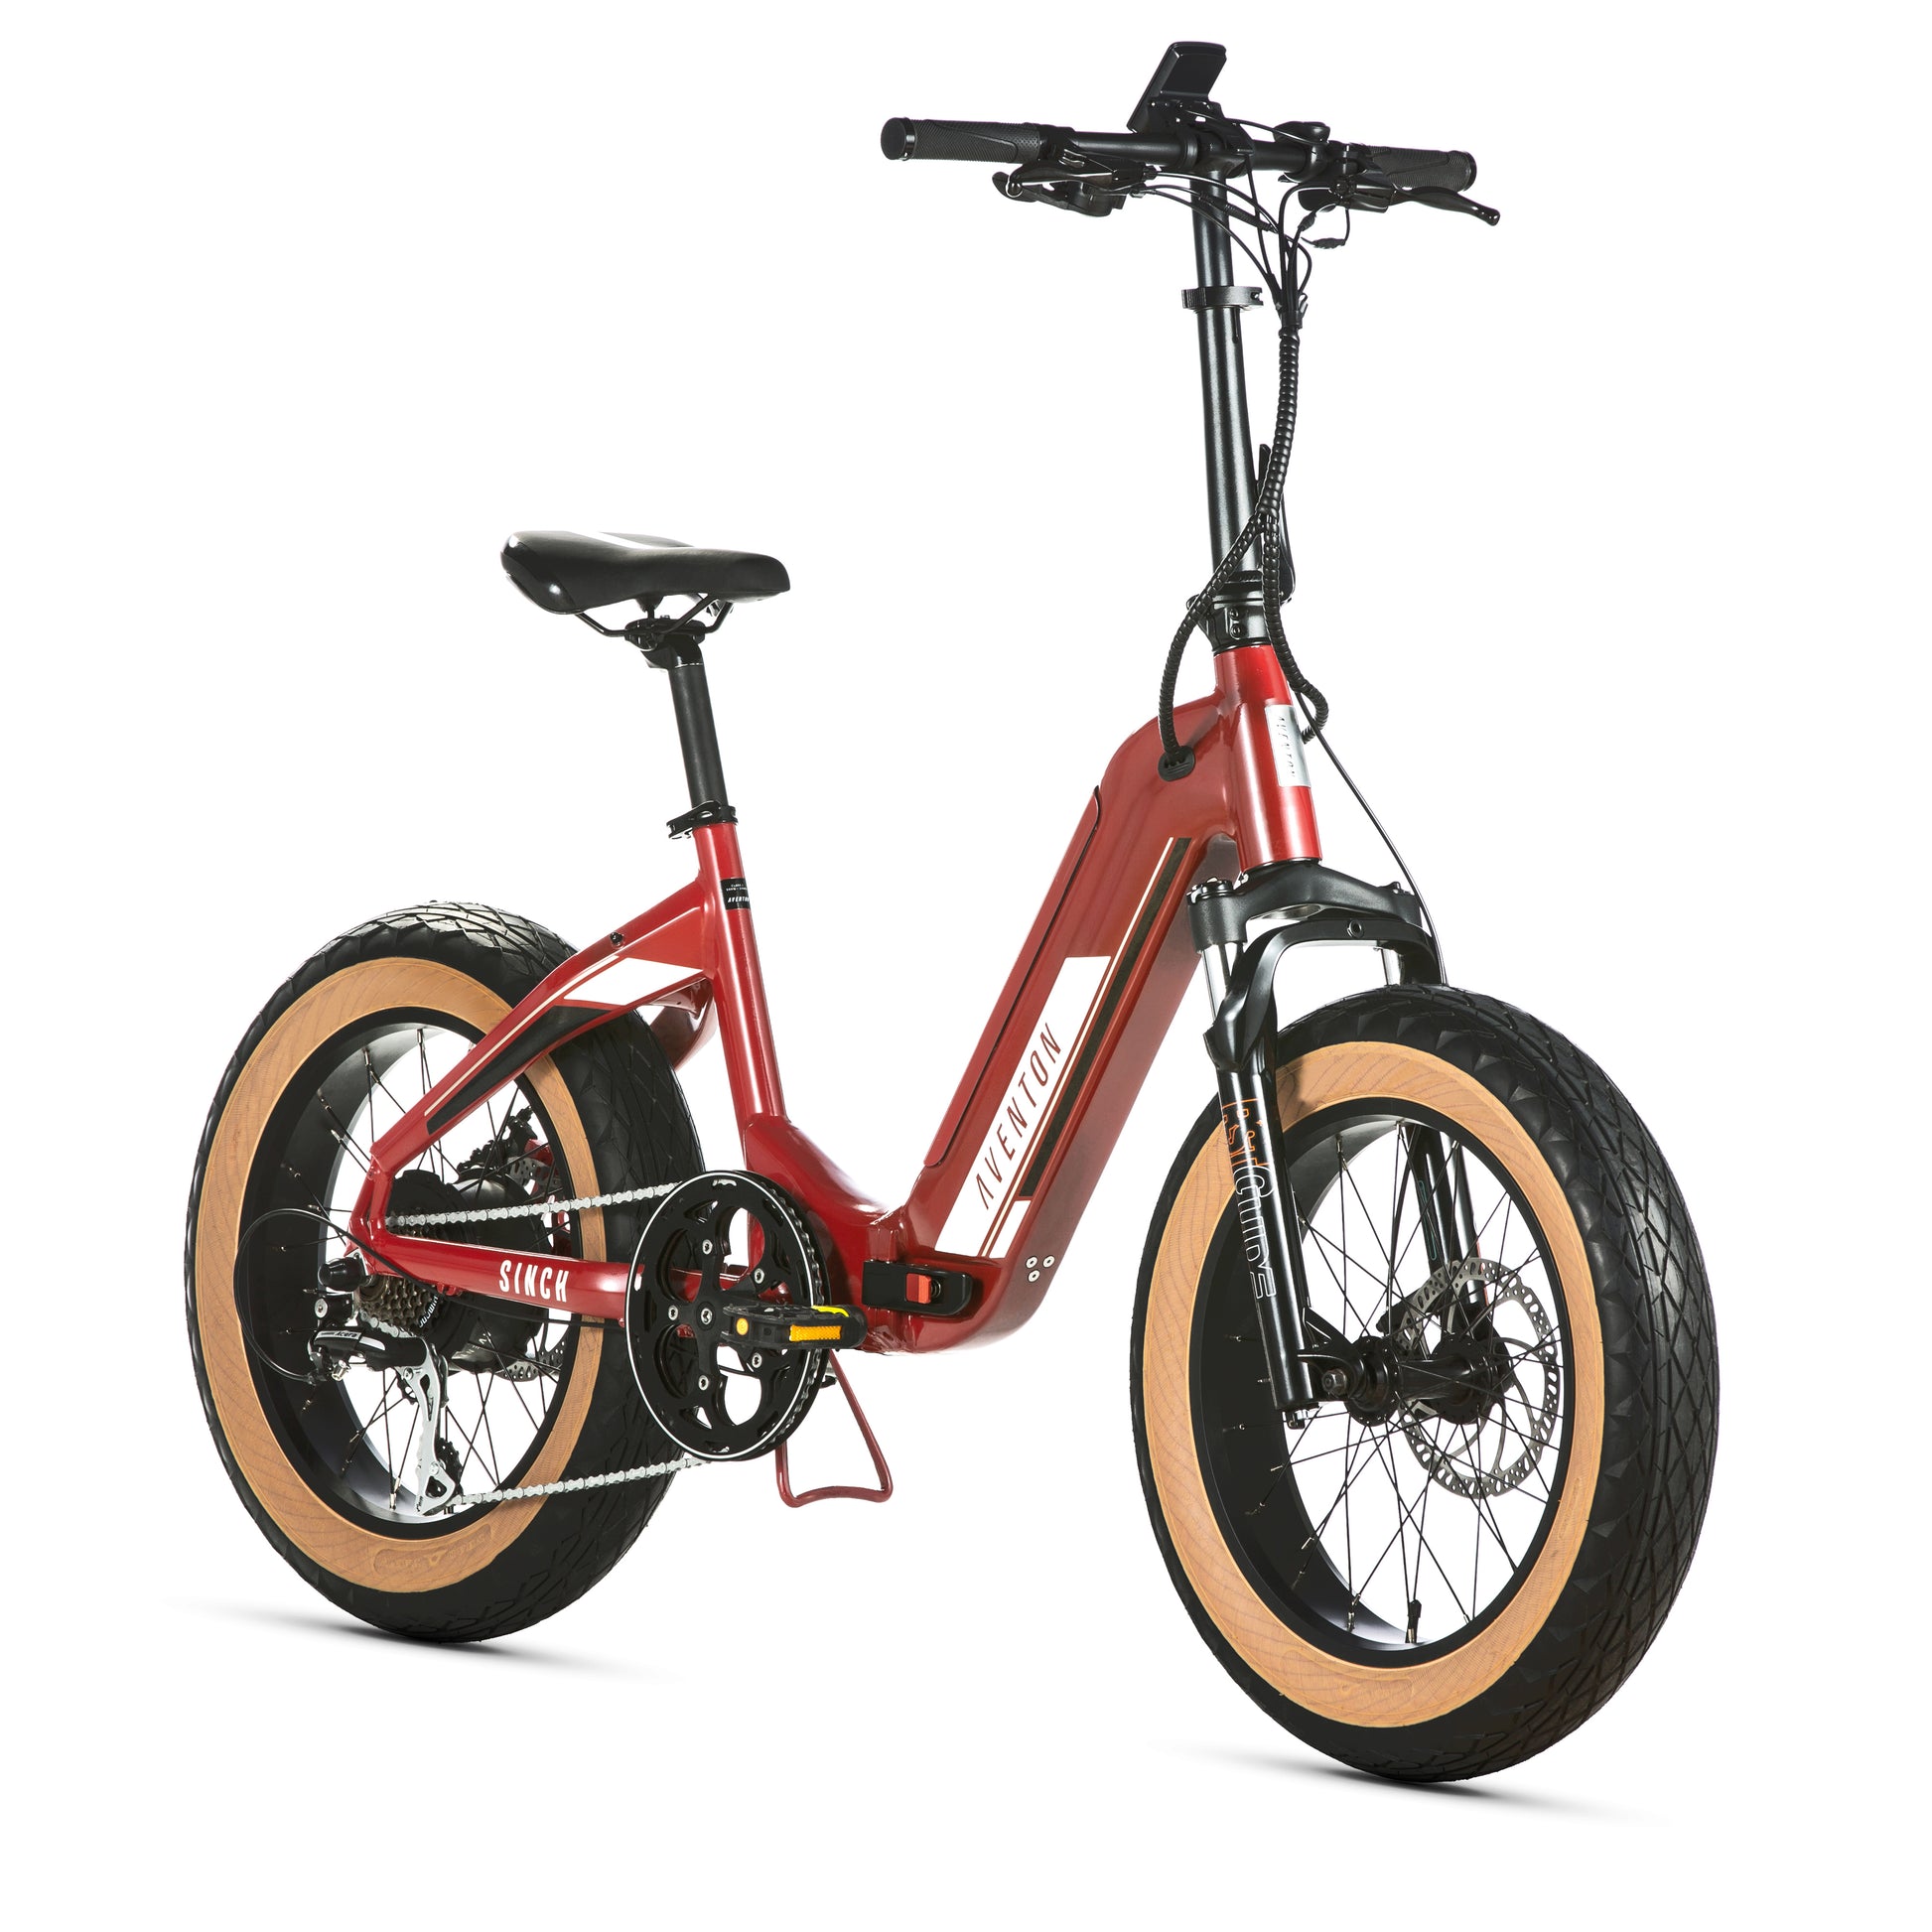 This Aventon Bonfire Red electric bike has tan tires and is portable.